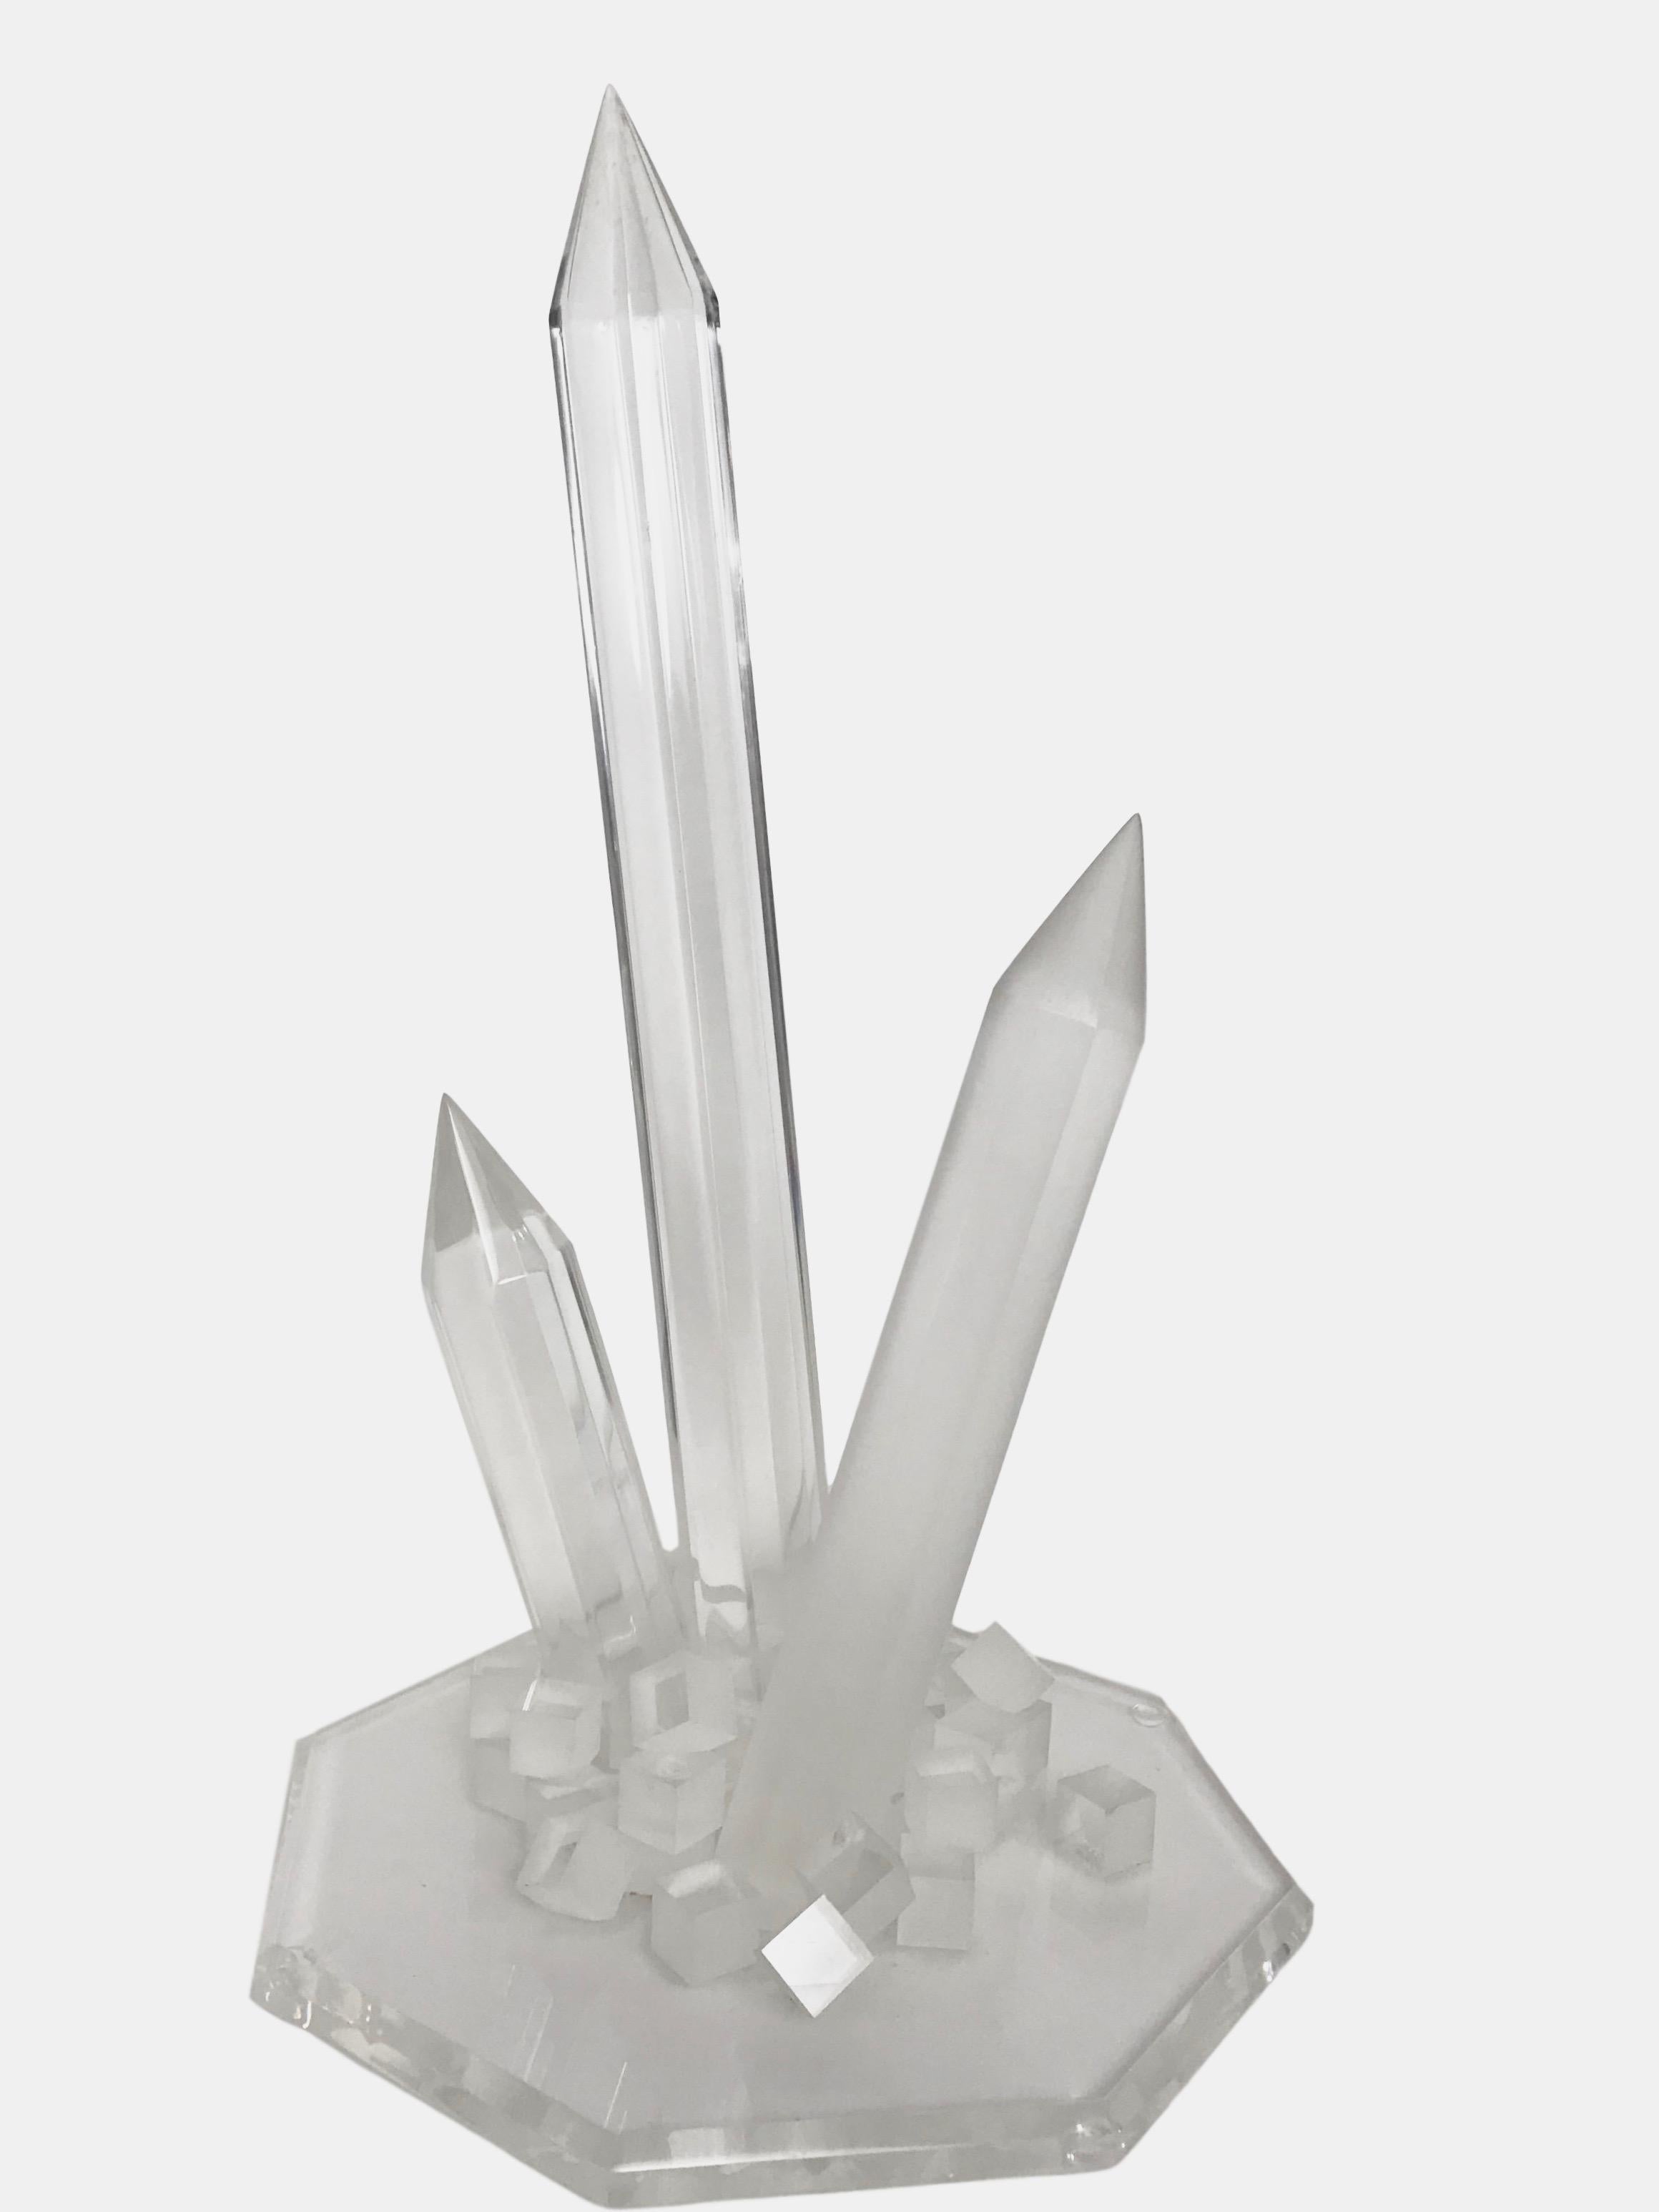 This is a Postmodern Lucite sculpture of a crystal formation on a heptagon base. Two of the crystal formations are a clear Lucite and one is a frosted Lucite.